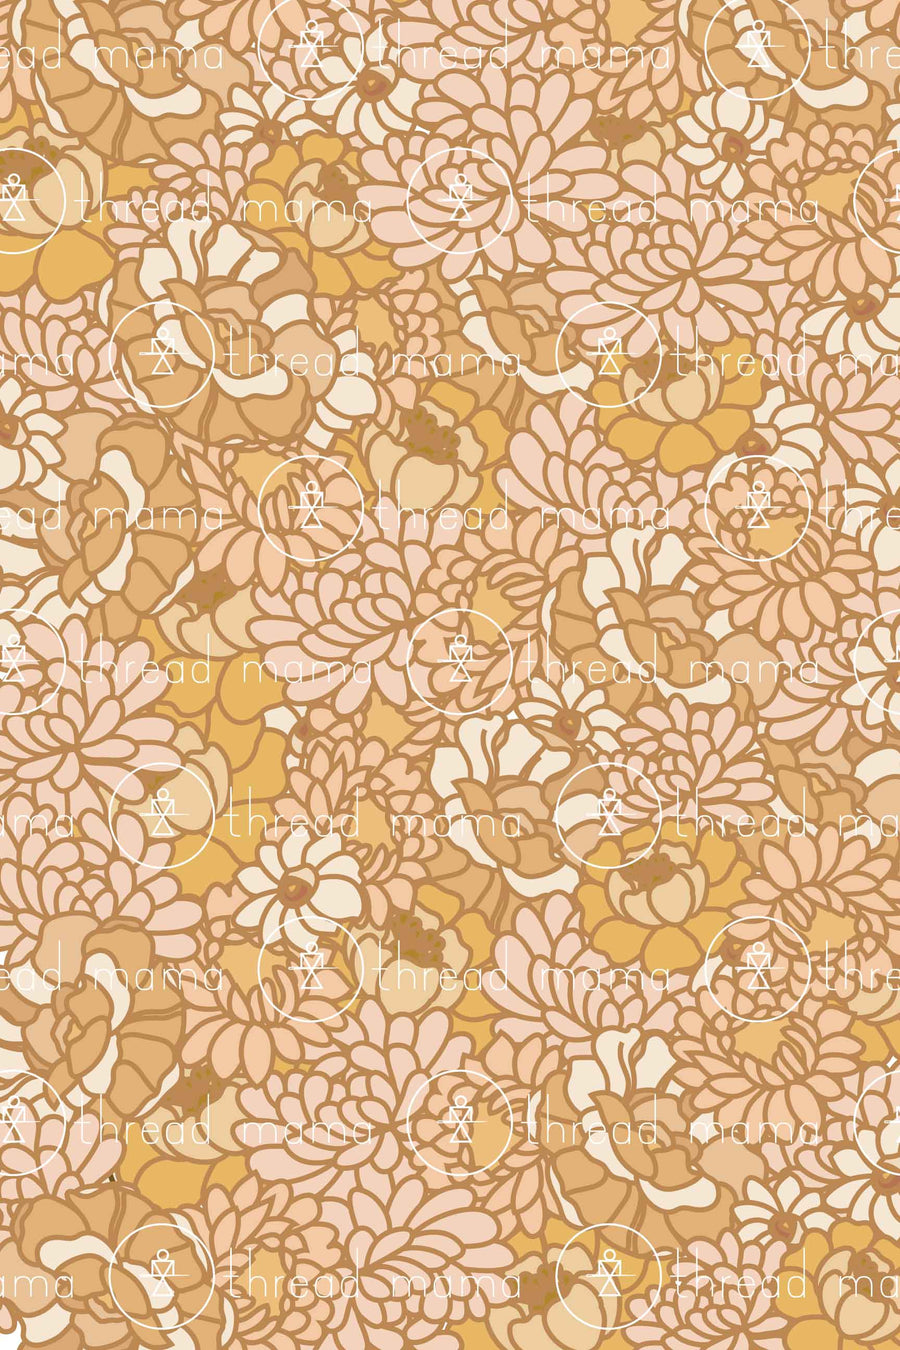 Repeating Pattern #10 (Seamless)